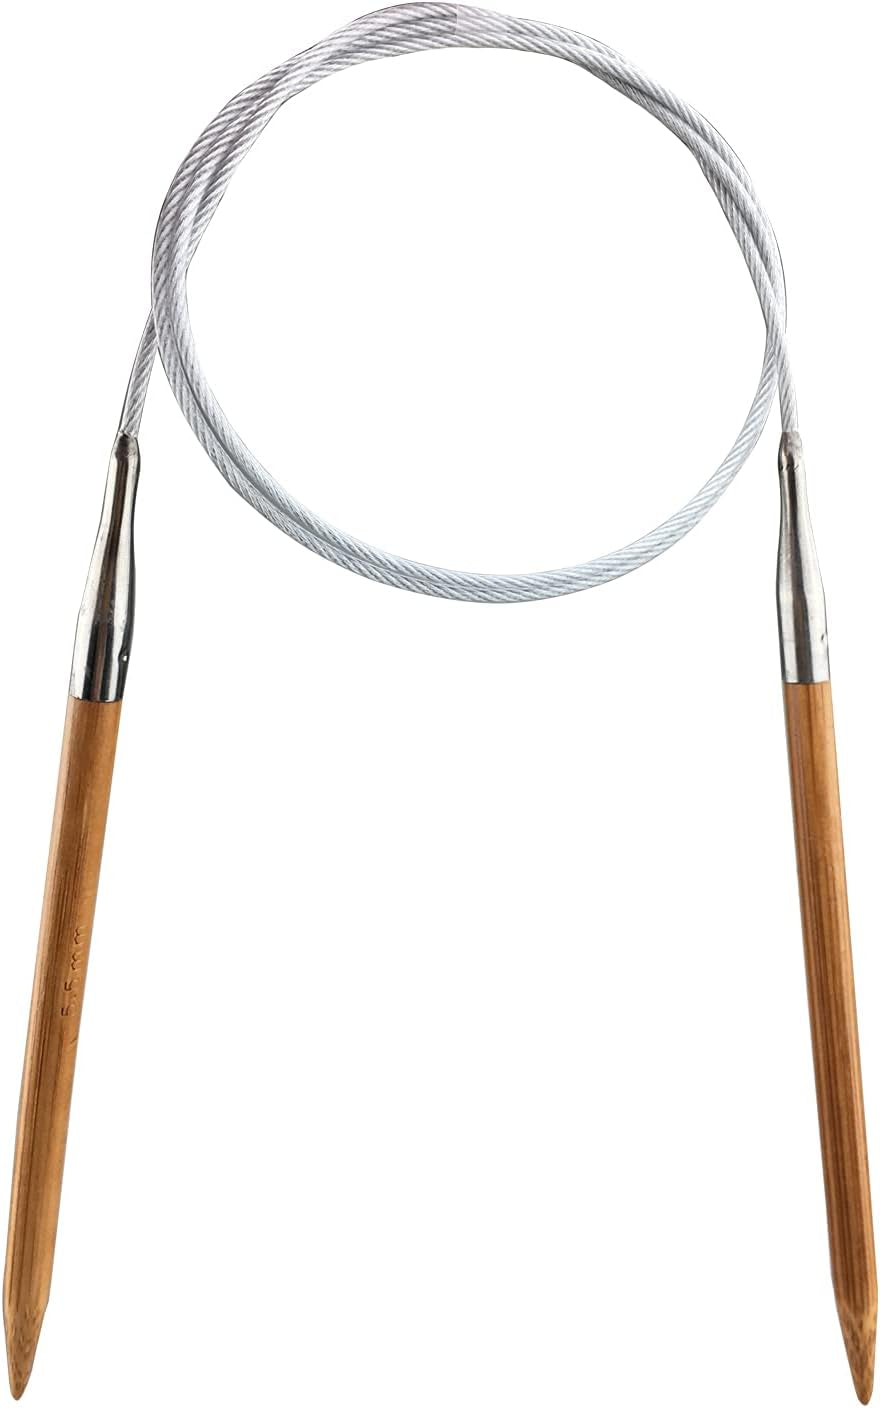 Bamboo Circular Knitting Needle,32-Inch Length for Handmade Creative DIY and Any Weave Yarn Projects,Us Size 11(8Mm)